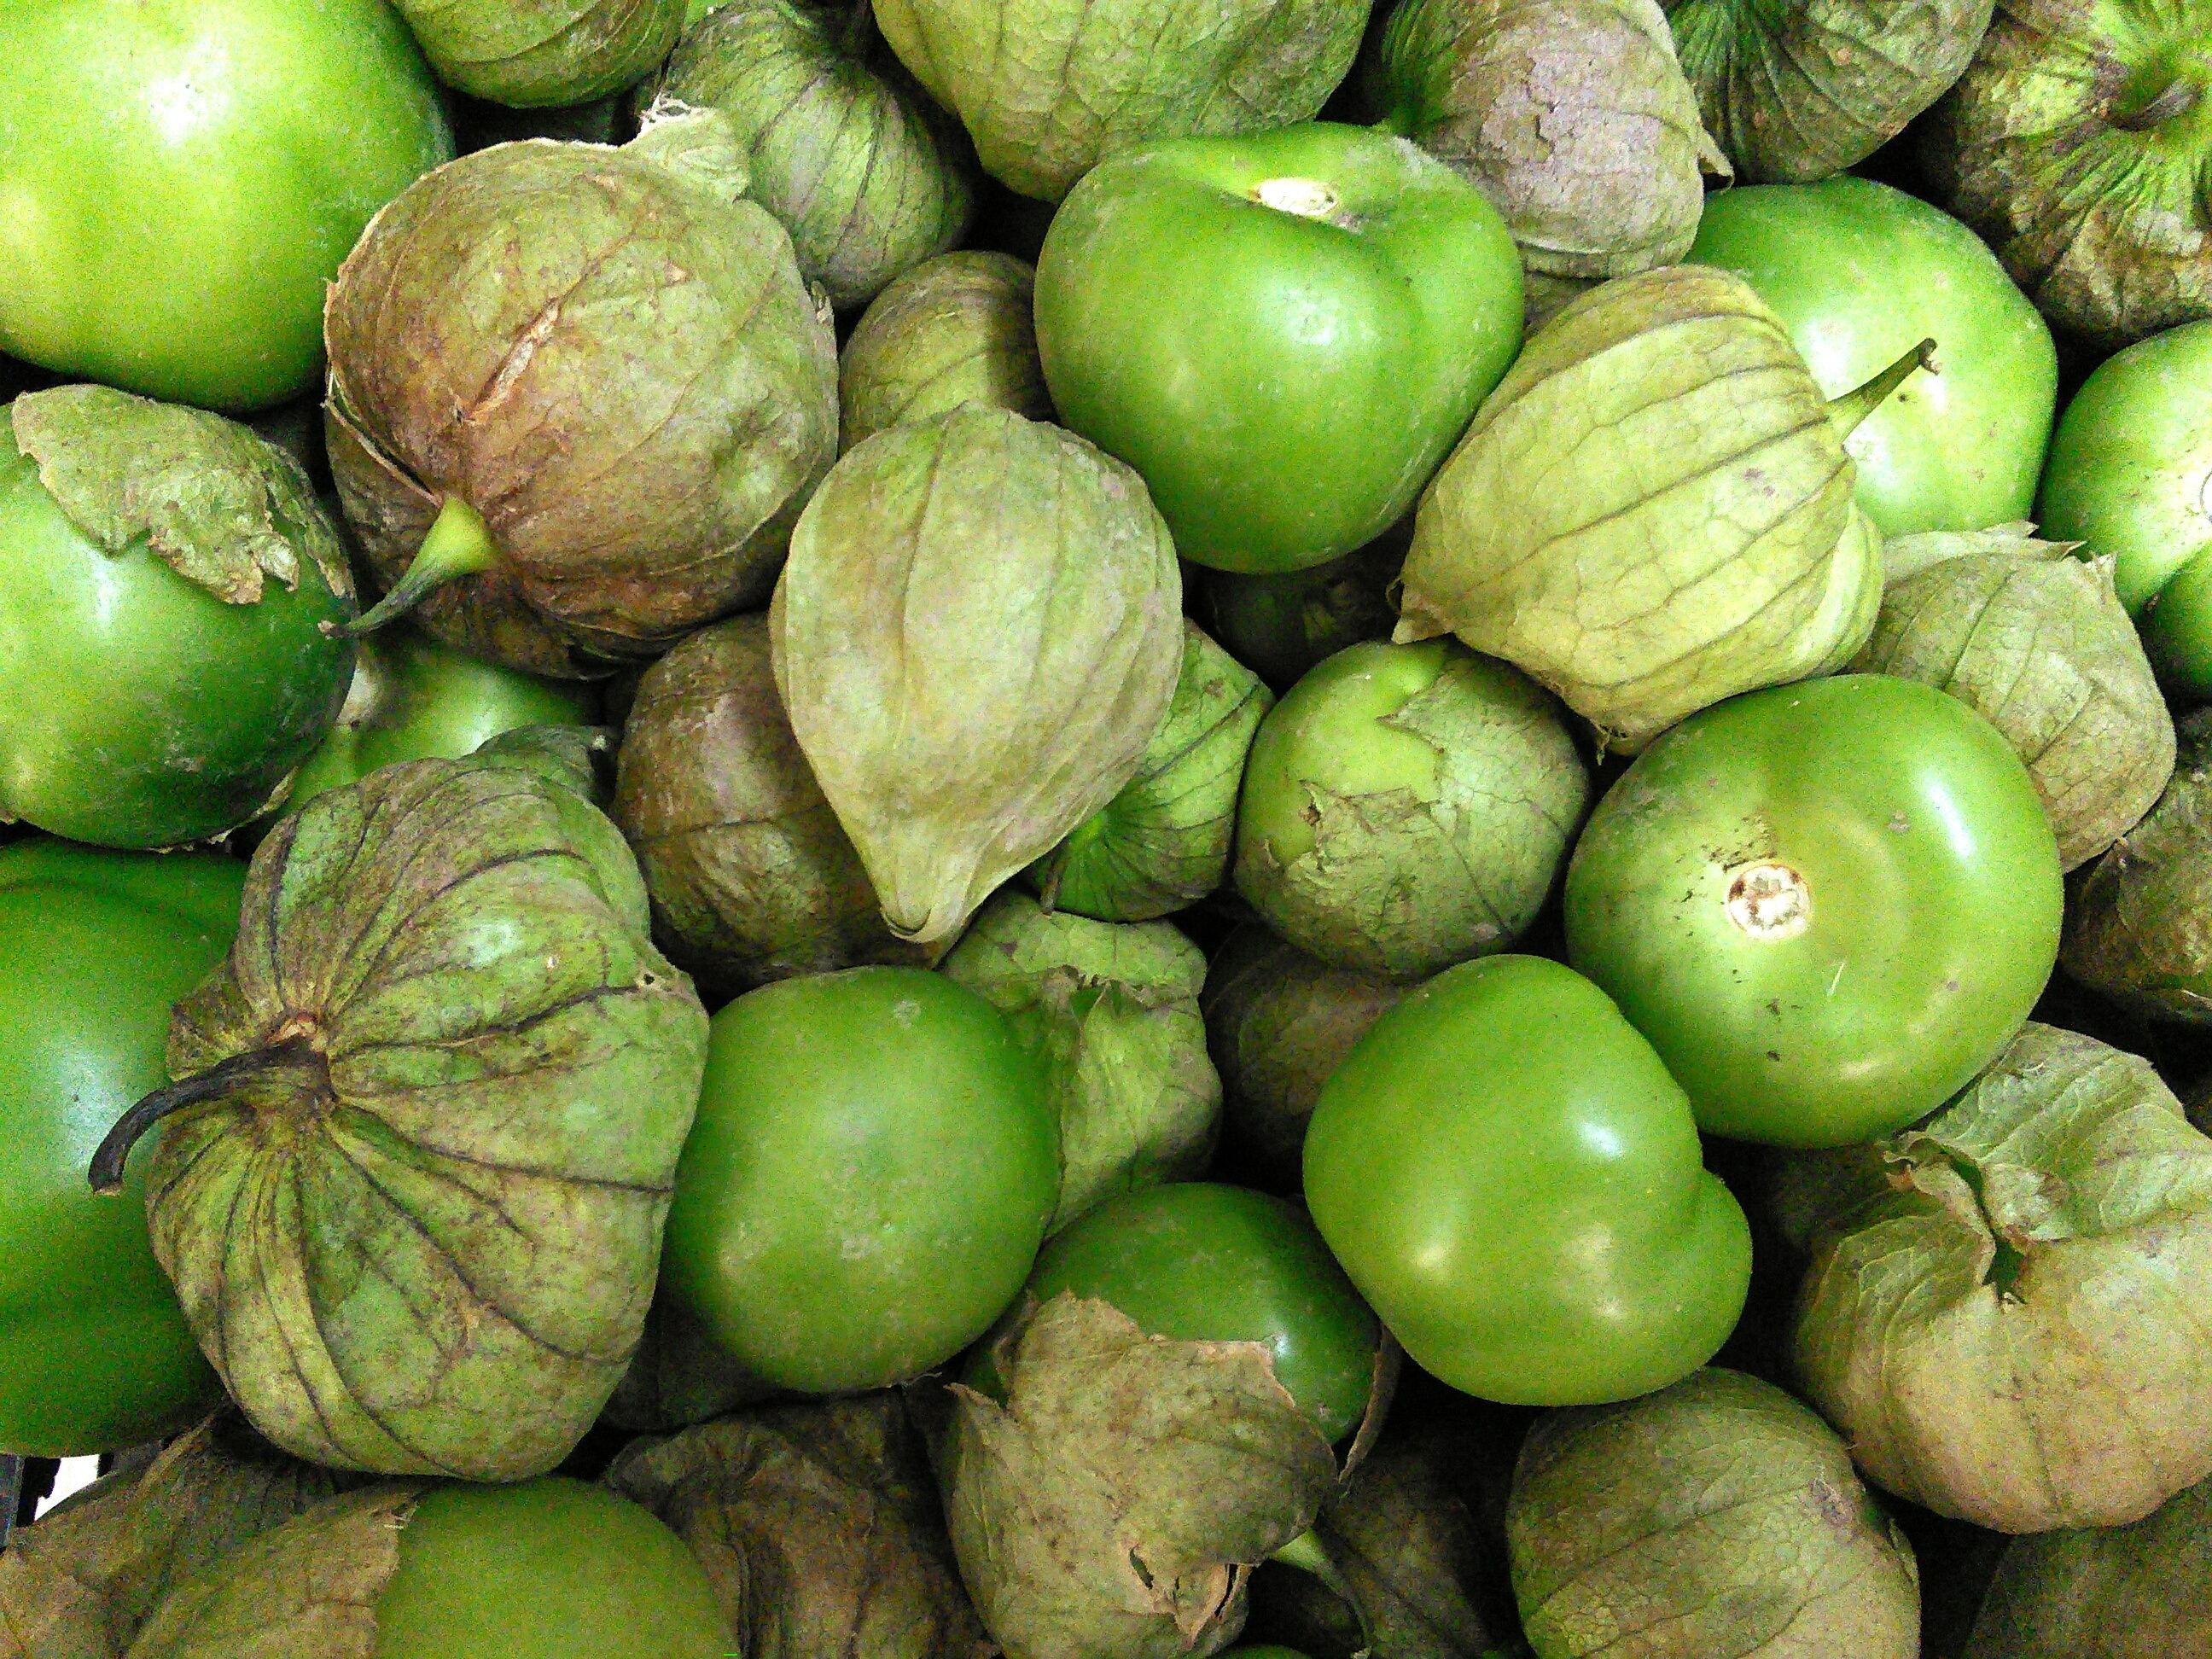 What Exactly Are Tomatillos? And How Do I Cook With Them?